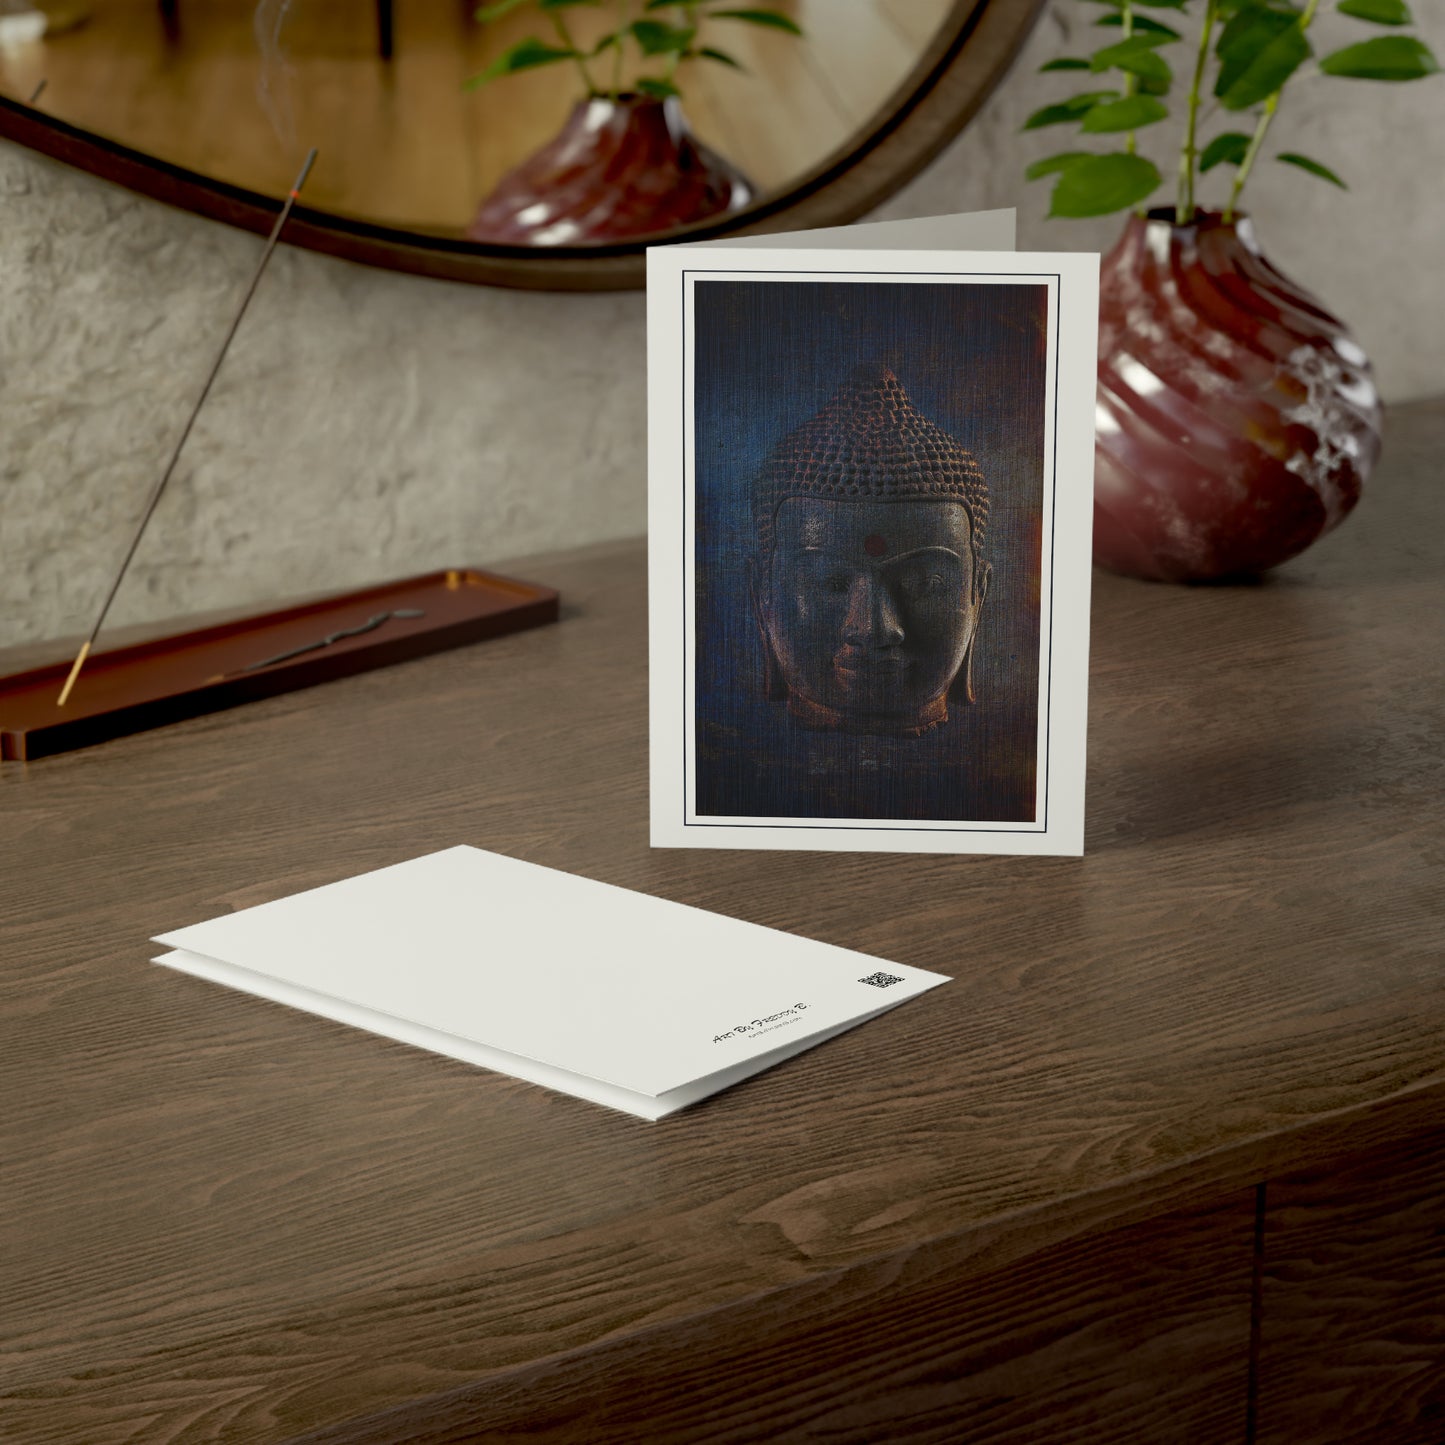 Blue Buddha Head Greeting Cards With Gratitude Message - Buddha Themed Stationery and Cards on table